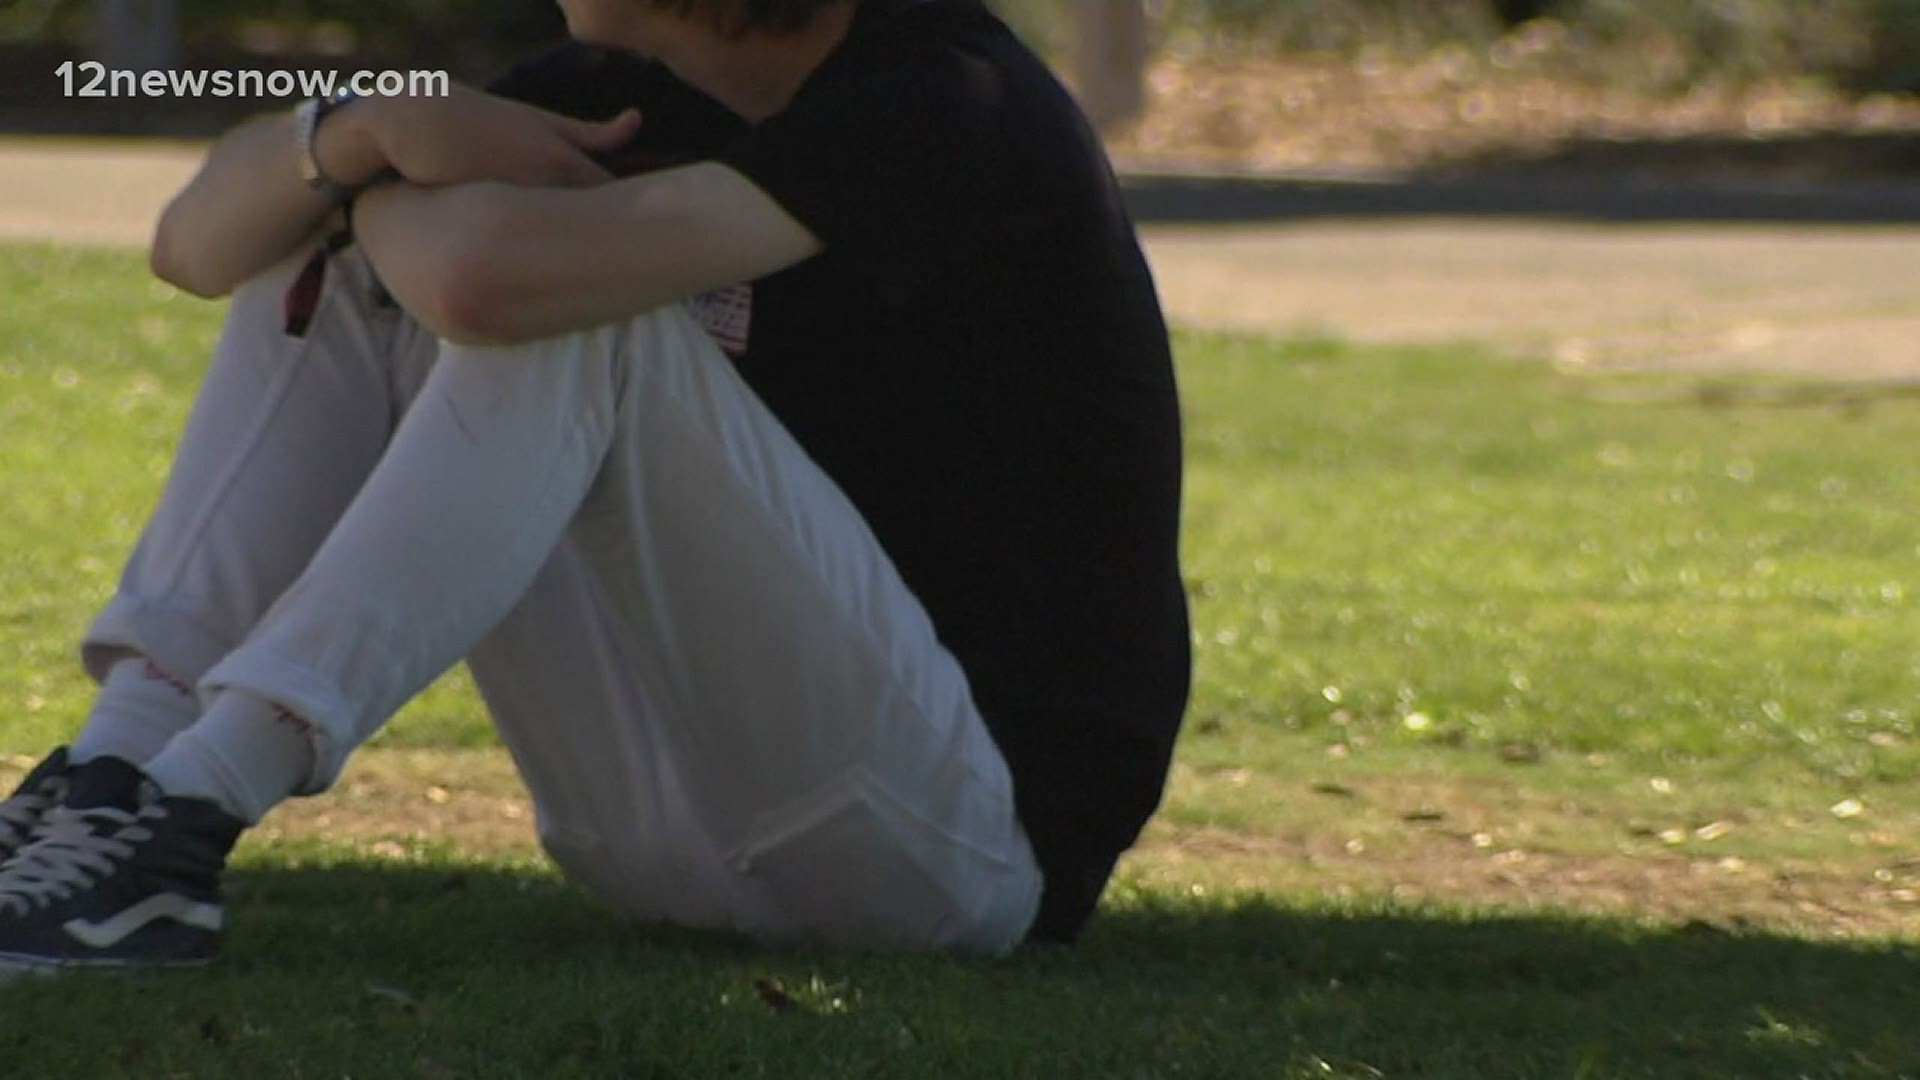 12News spoke to a licensed counselor about what to do if you're feeling upset.